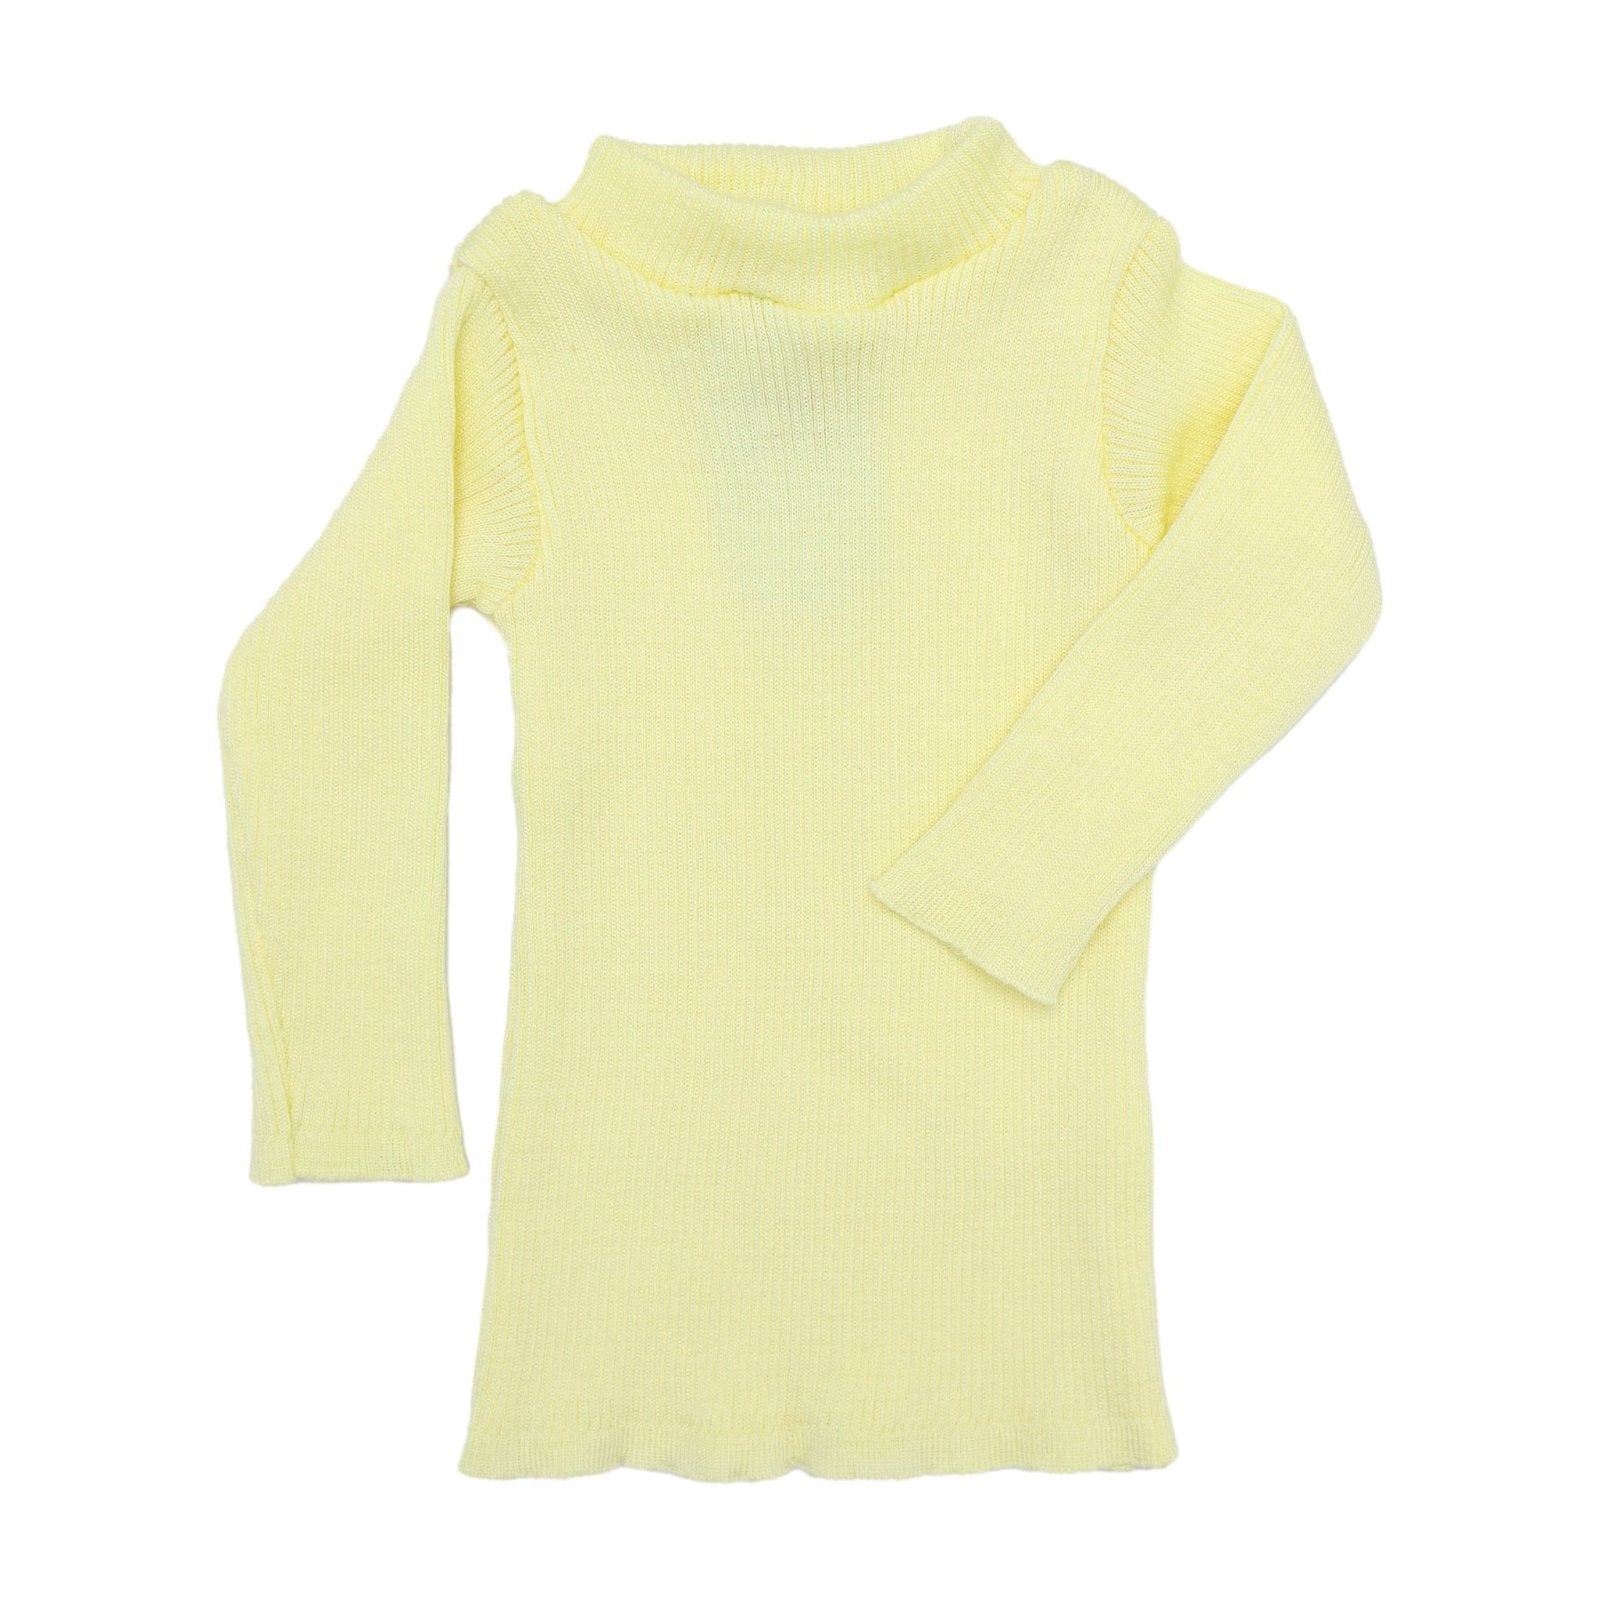 Baby High Neck Yellow Color by Little Darling